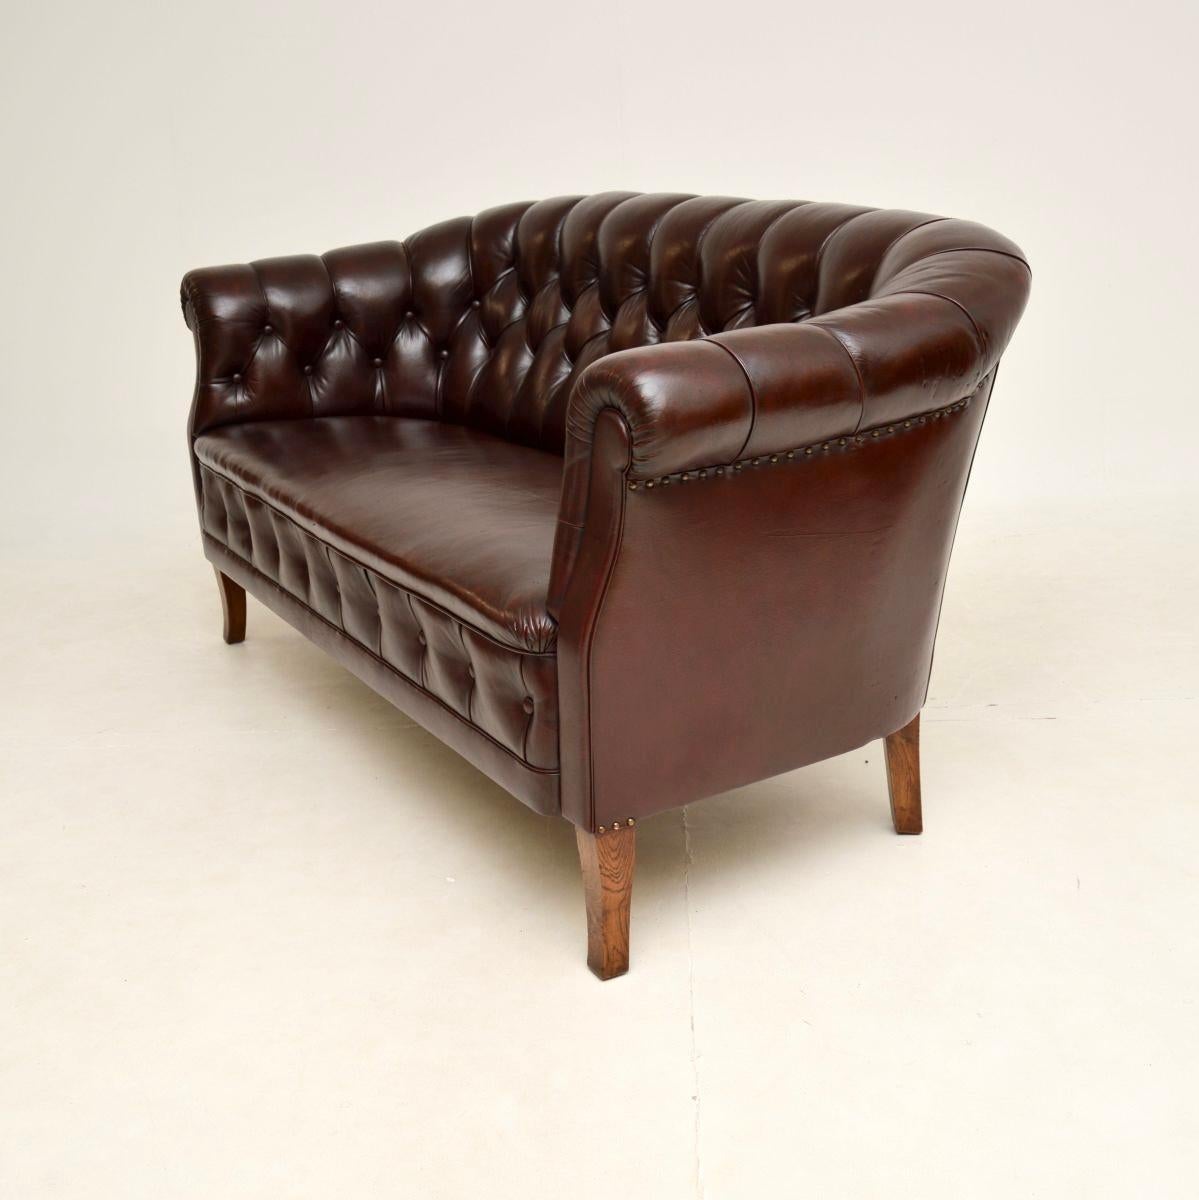 Antique Swedish Leather Sofa In Good Condition For Sale In London, GB